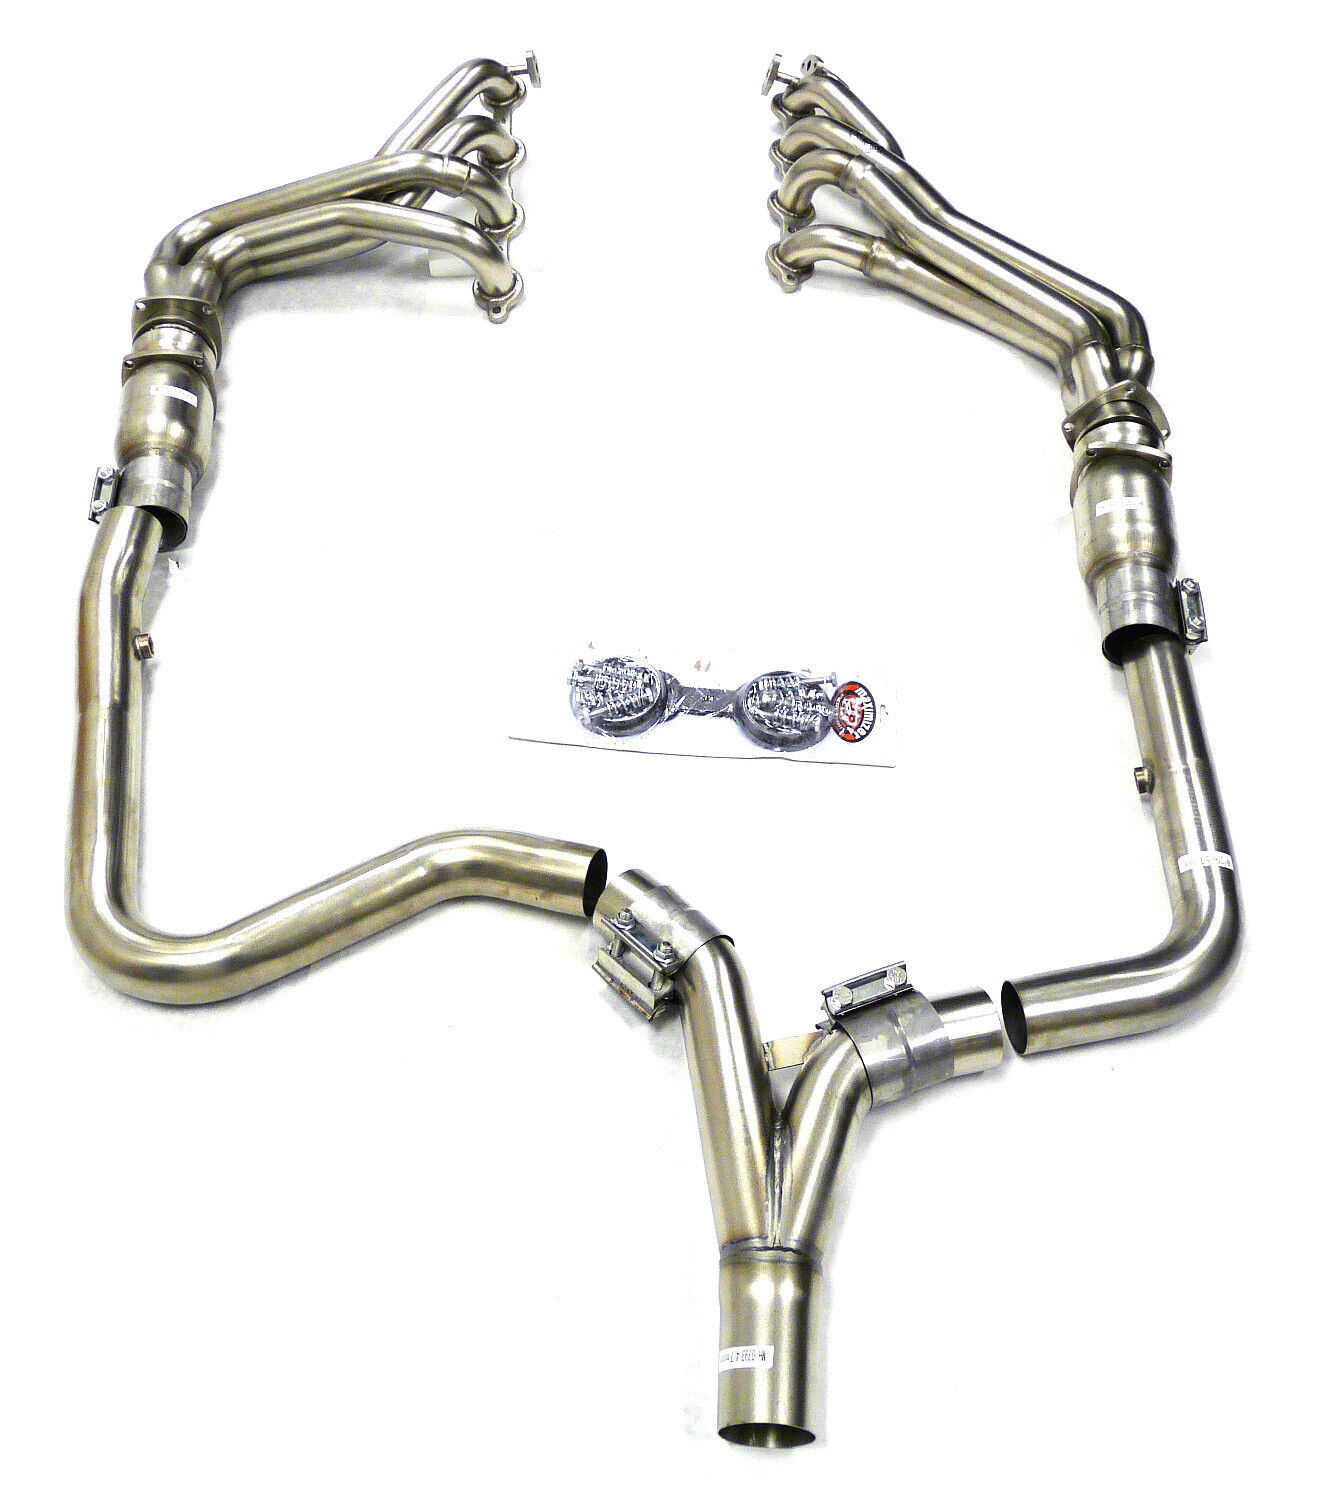 Maximizer Stainless Exhaust Header For 98-99 Camaro Firebird F-Body 5.7L F-Body